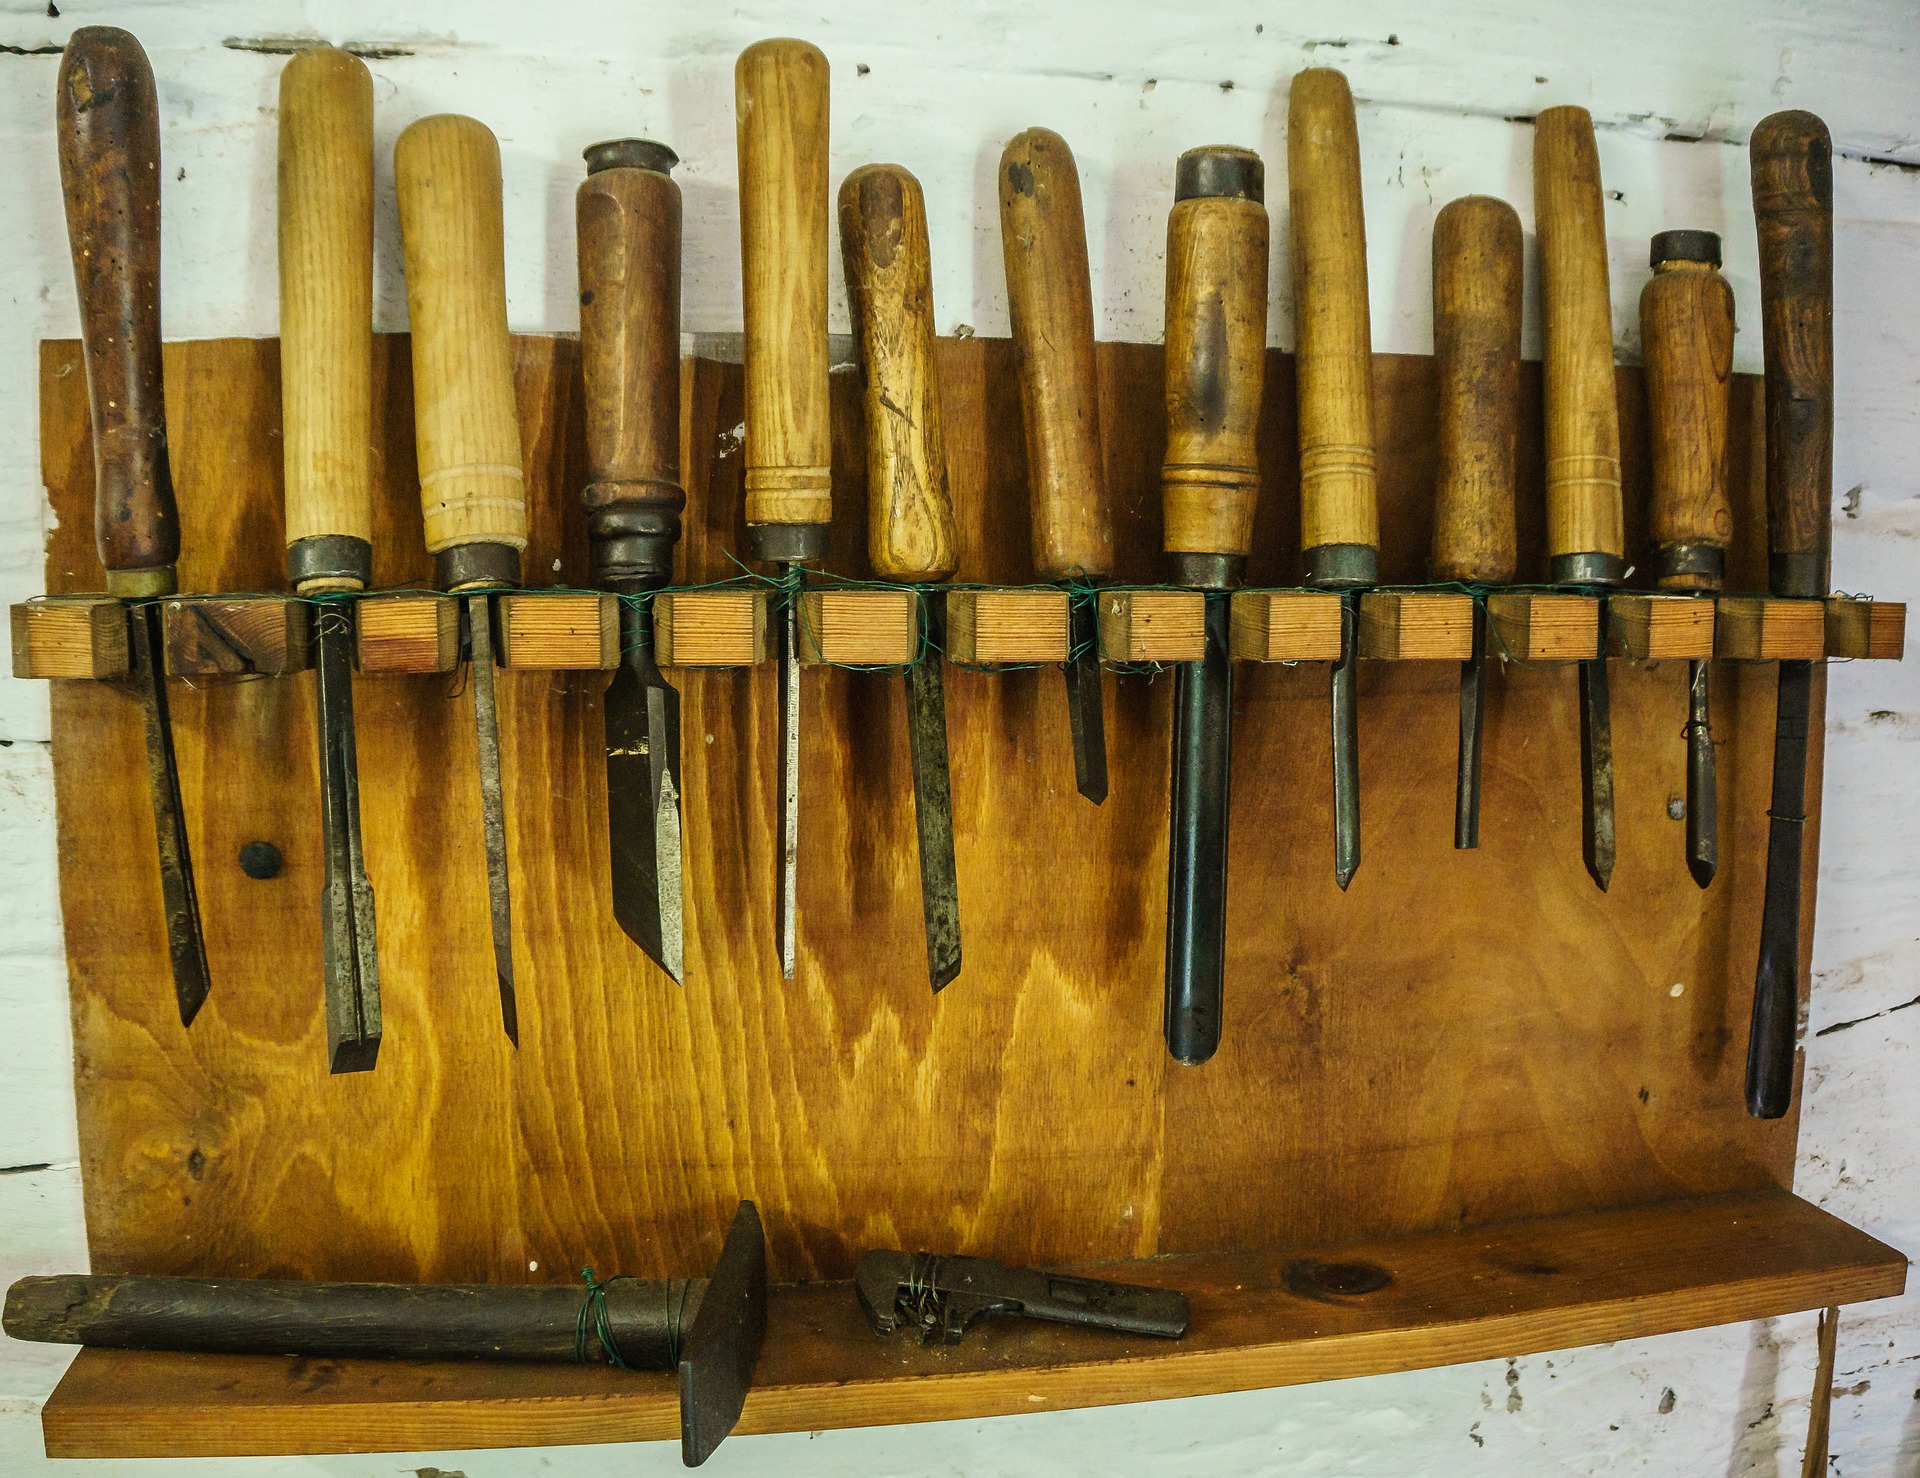 Types of Woodturning Tools (A Closer Look)